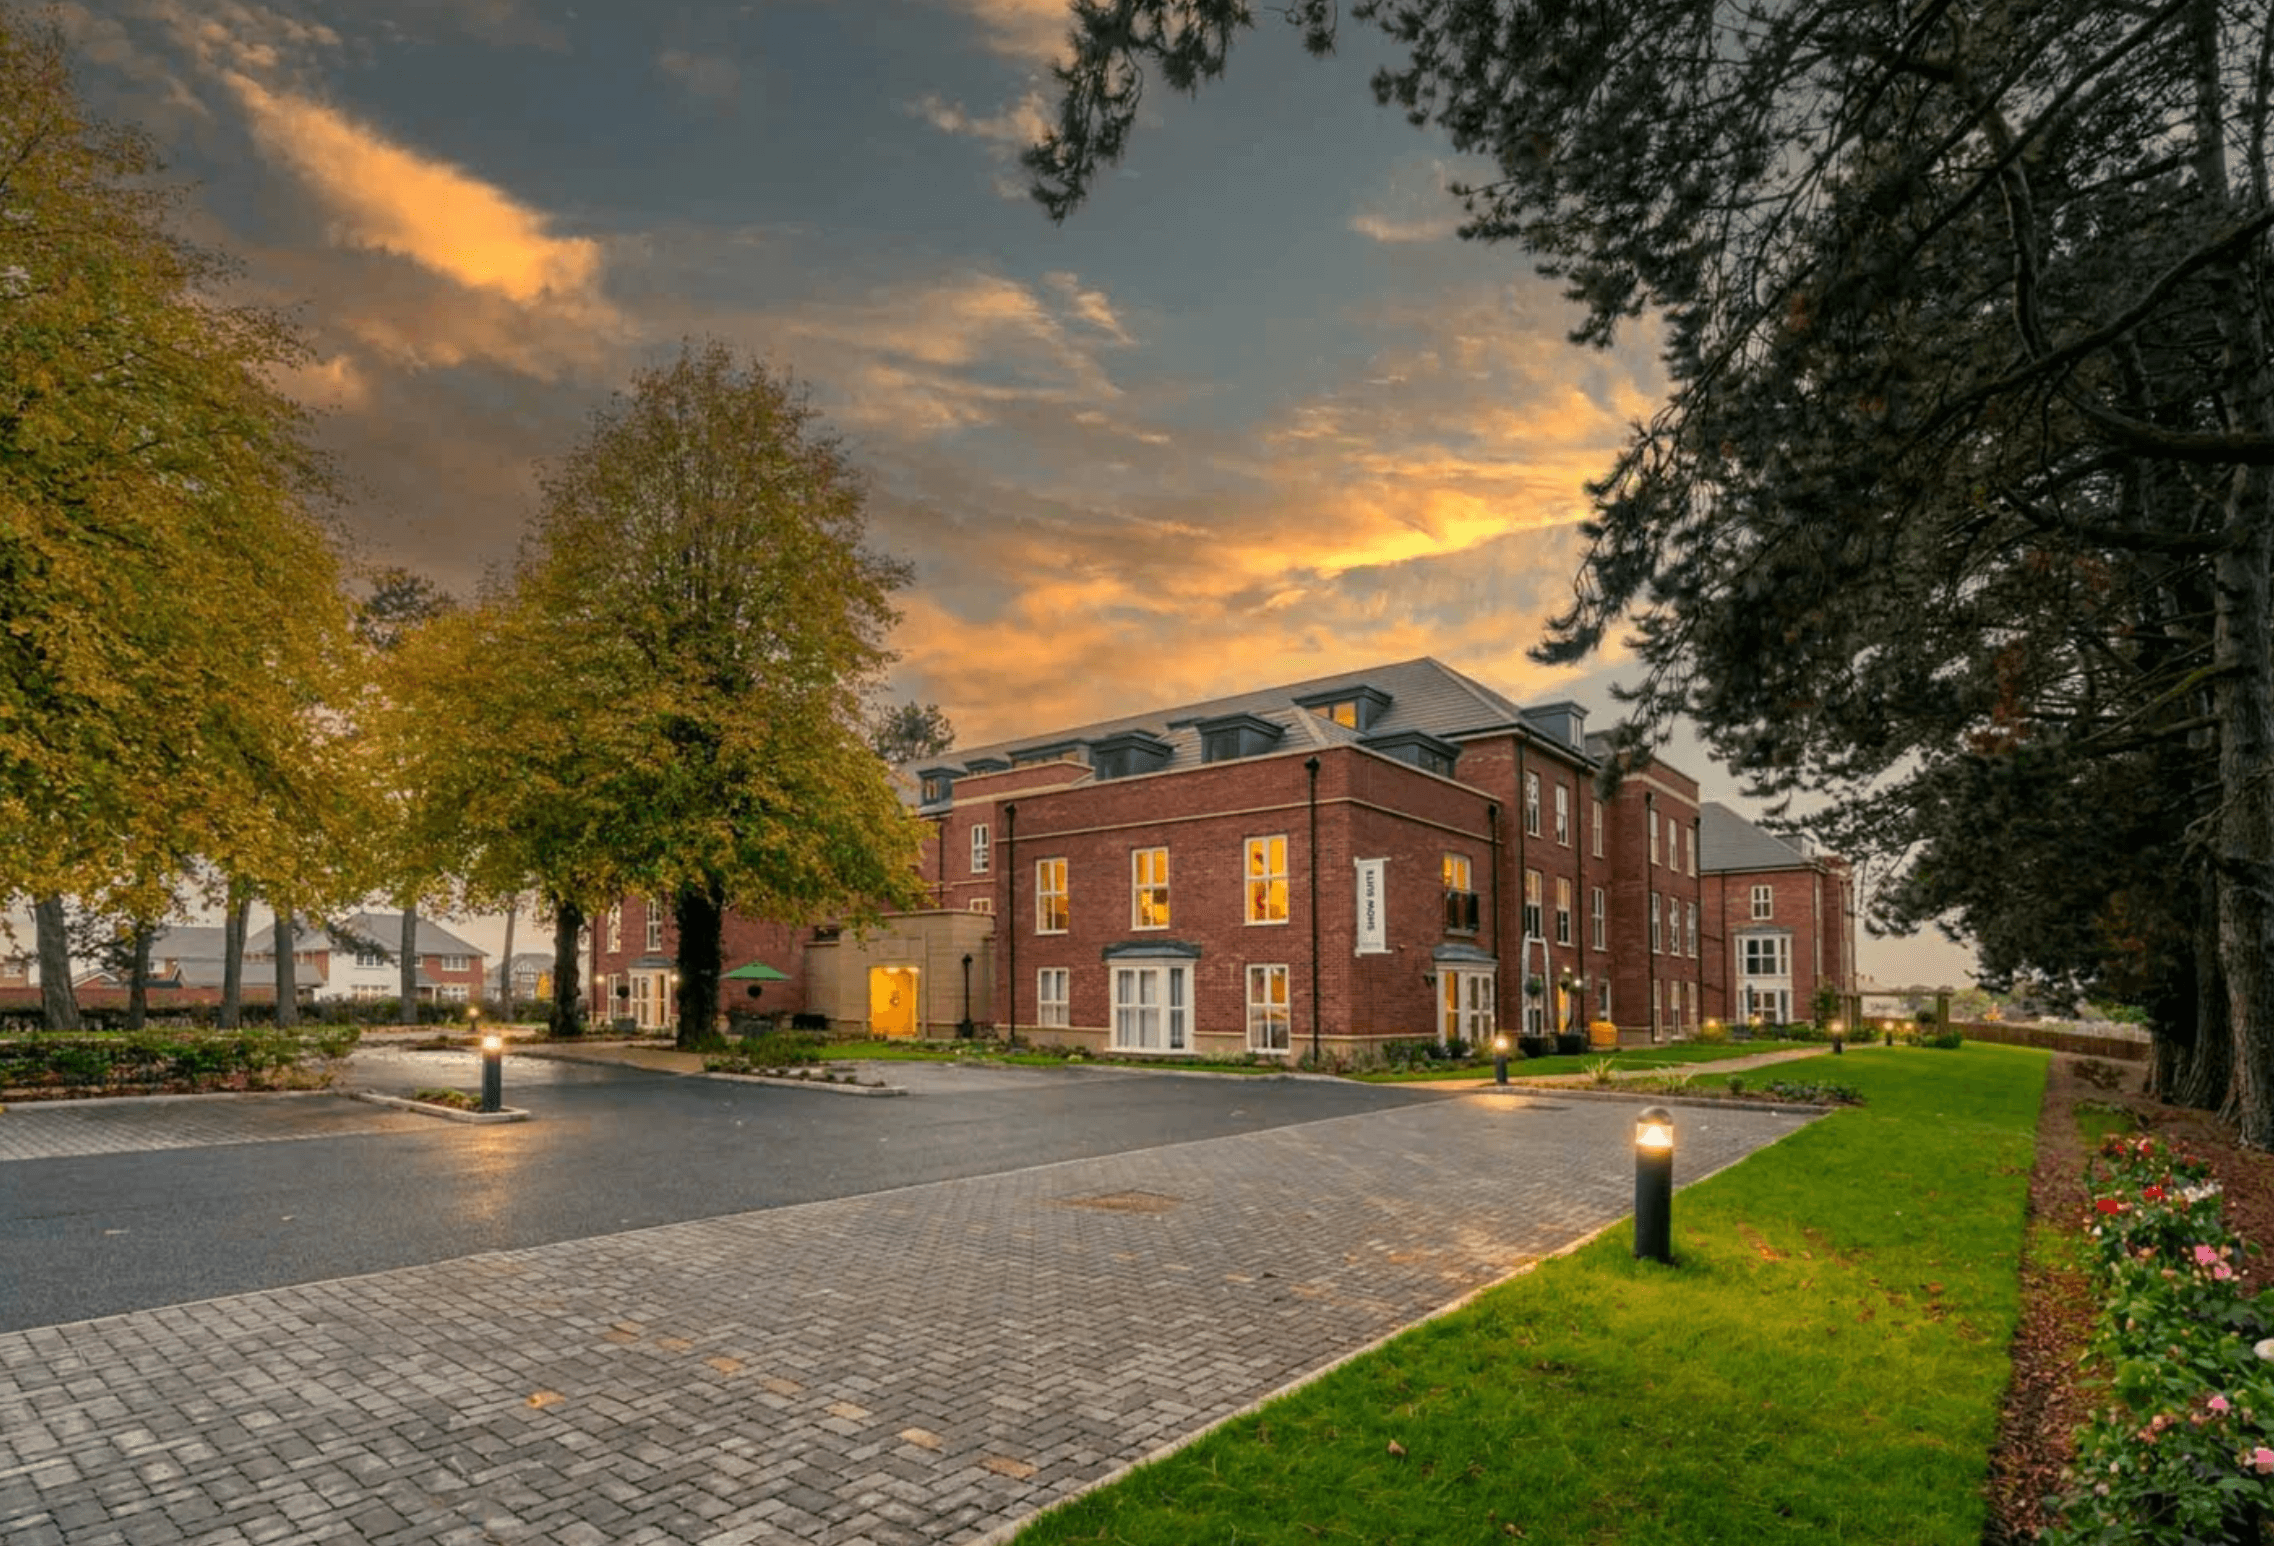 Exterior of Centennial Place in Knutsford, Cheshire